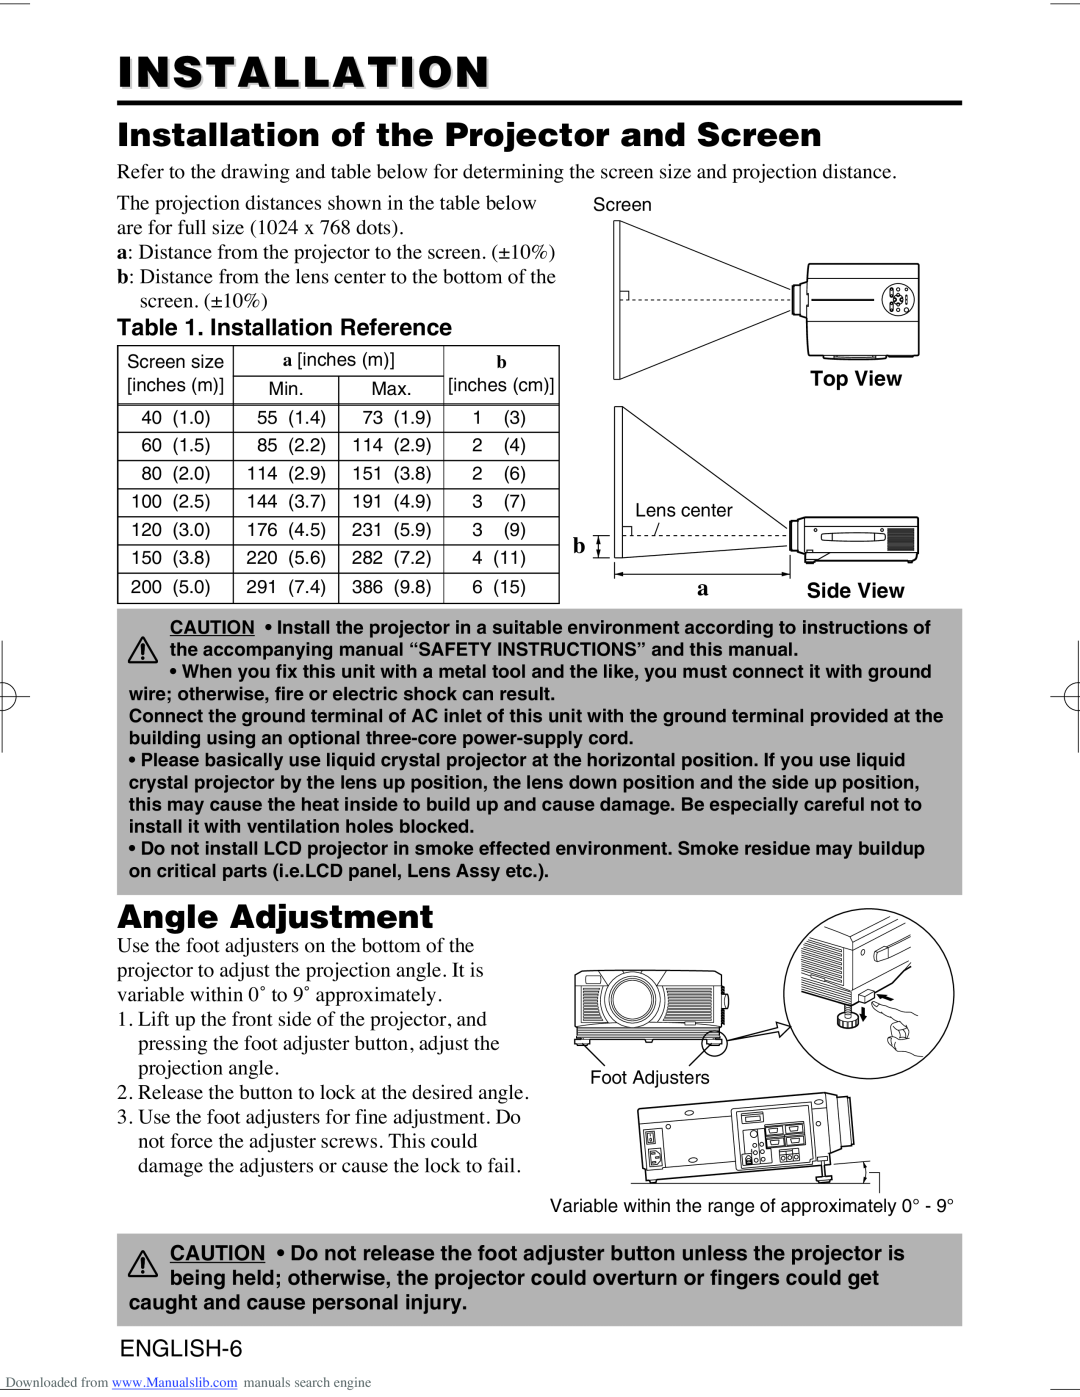 Hitachi CP-X995W user manual Installation of the Projector and Screen, Angle Adjustment, Installation Reference 